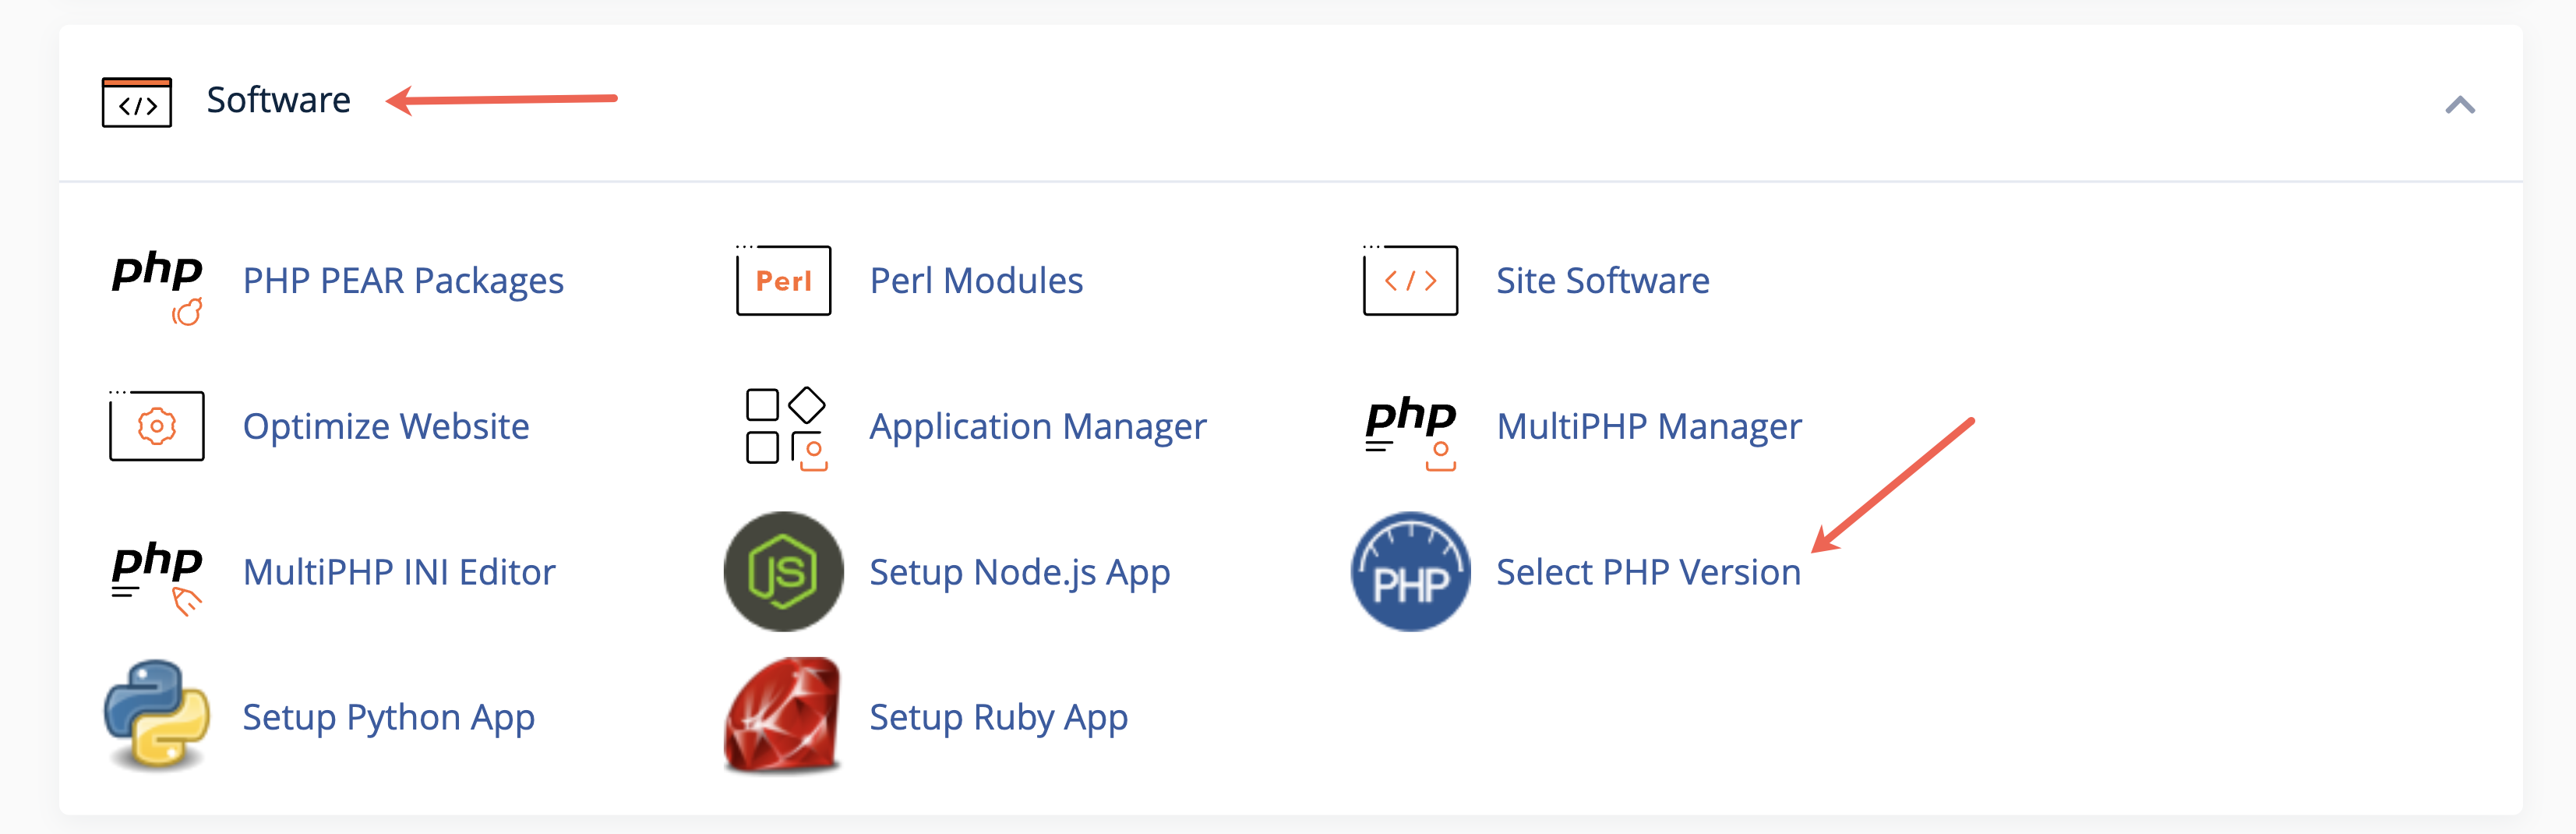 Figure 3: cPanel Dashboard Software Section